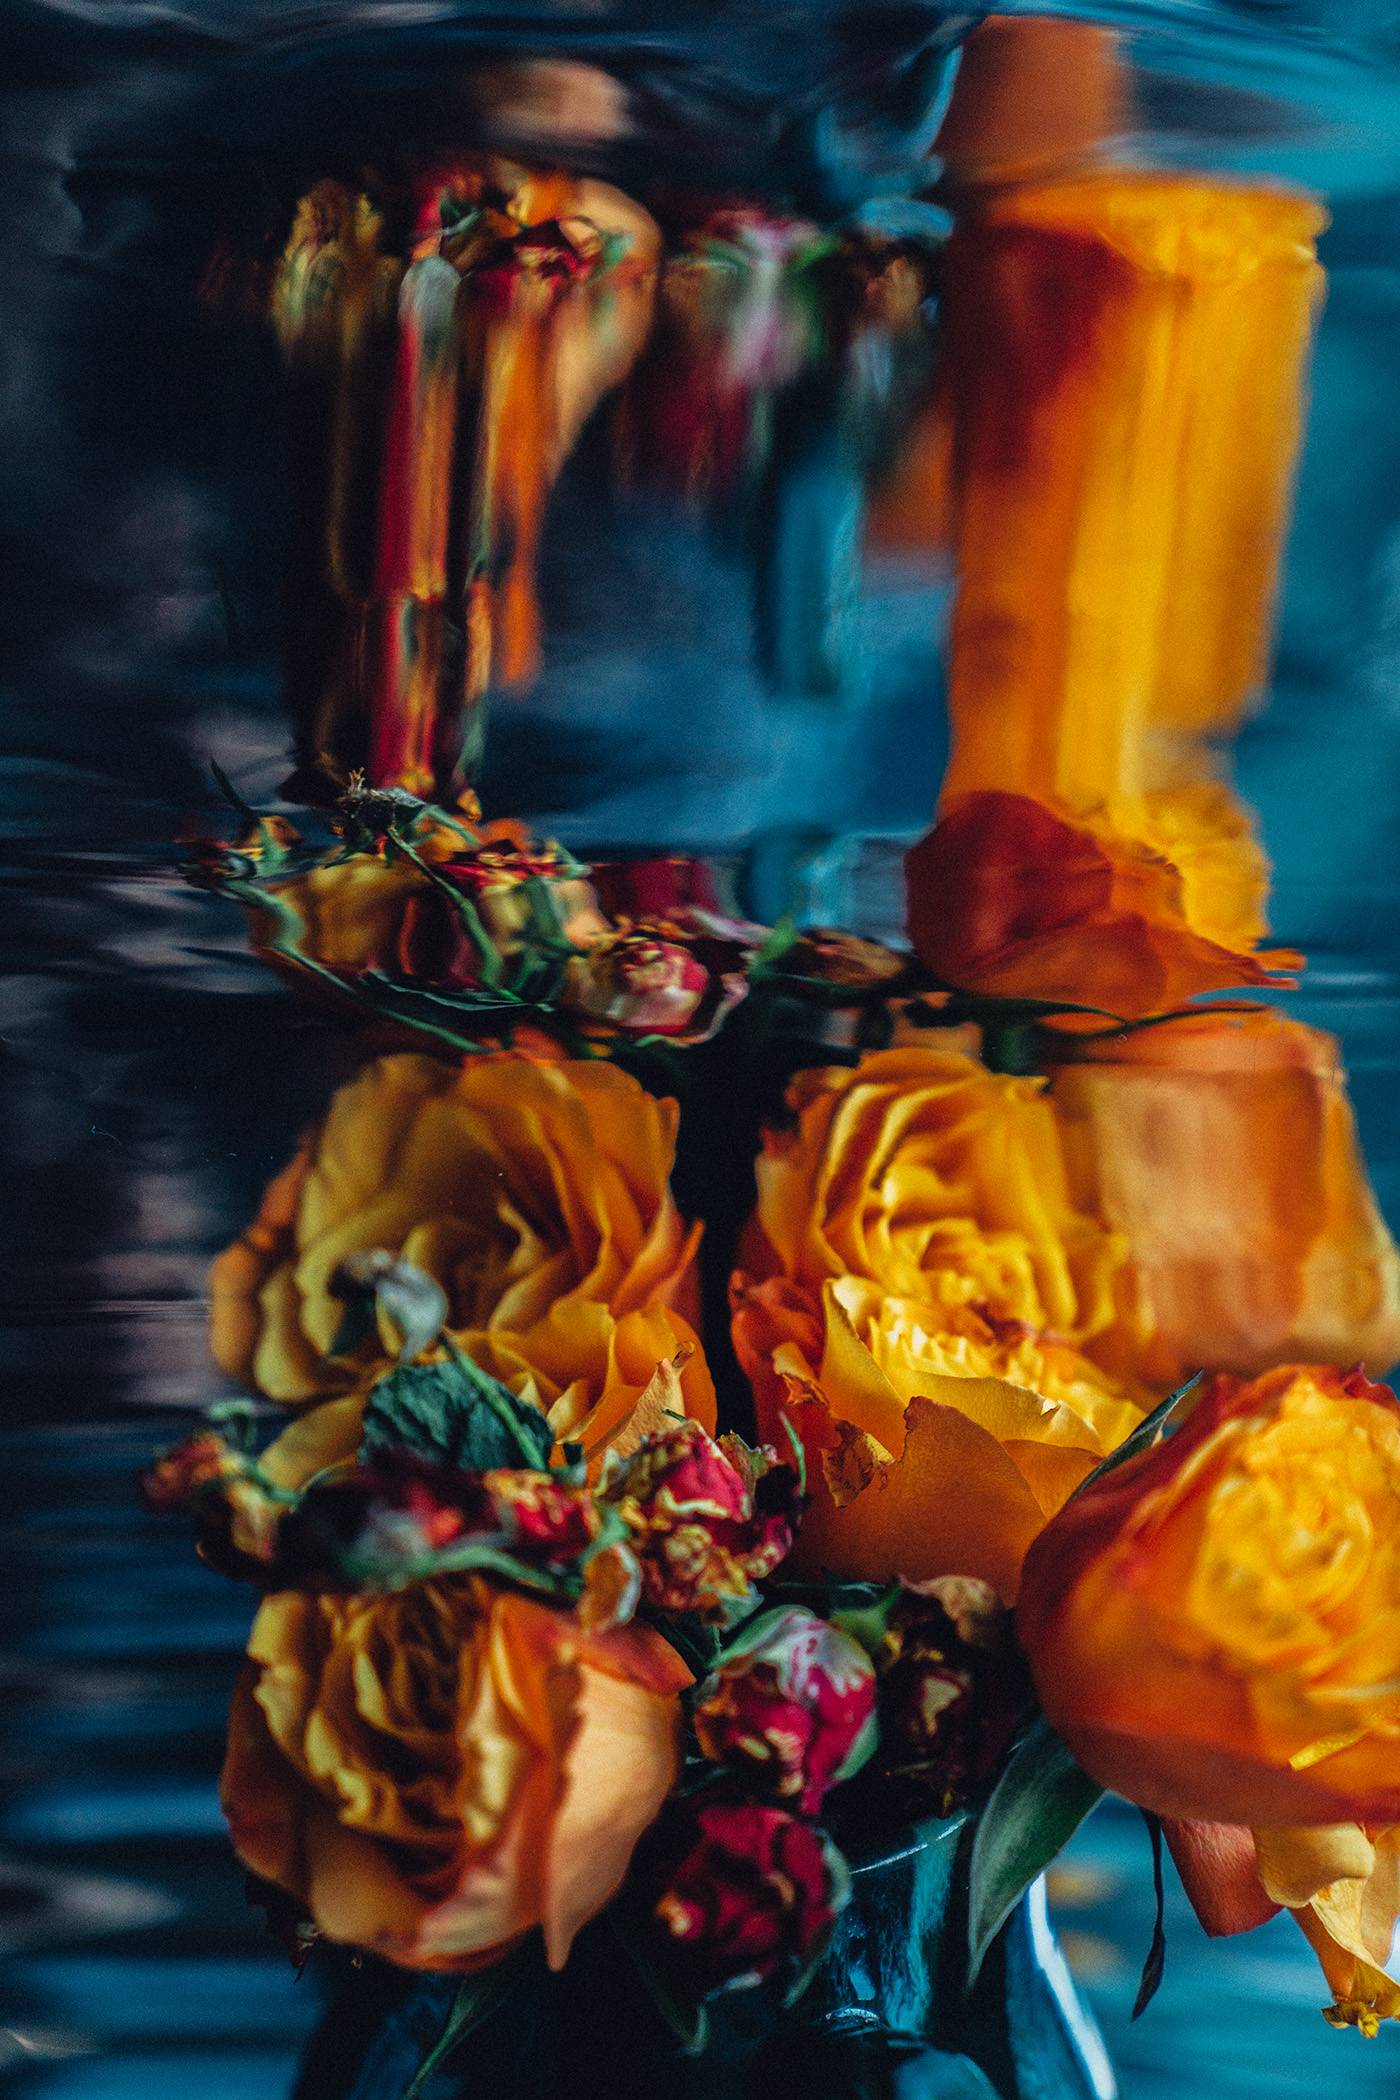 Bouquet of orange roses, peony rose buds, art still life, mirror surface, blurred reflections, gift to a dear person, floristry.